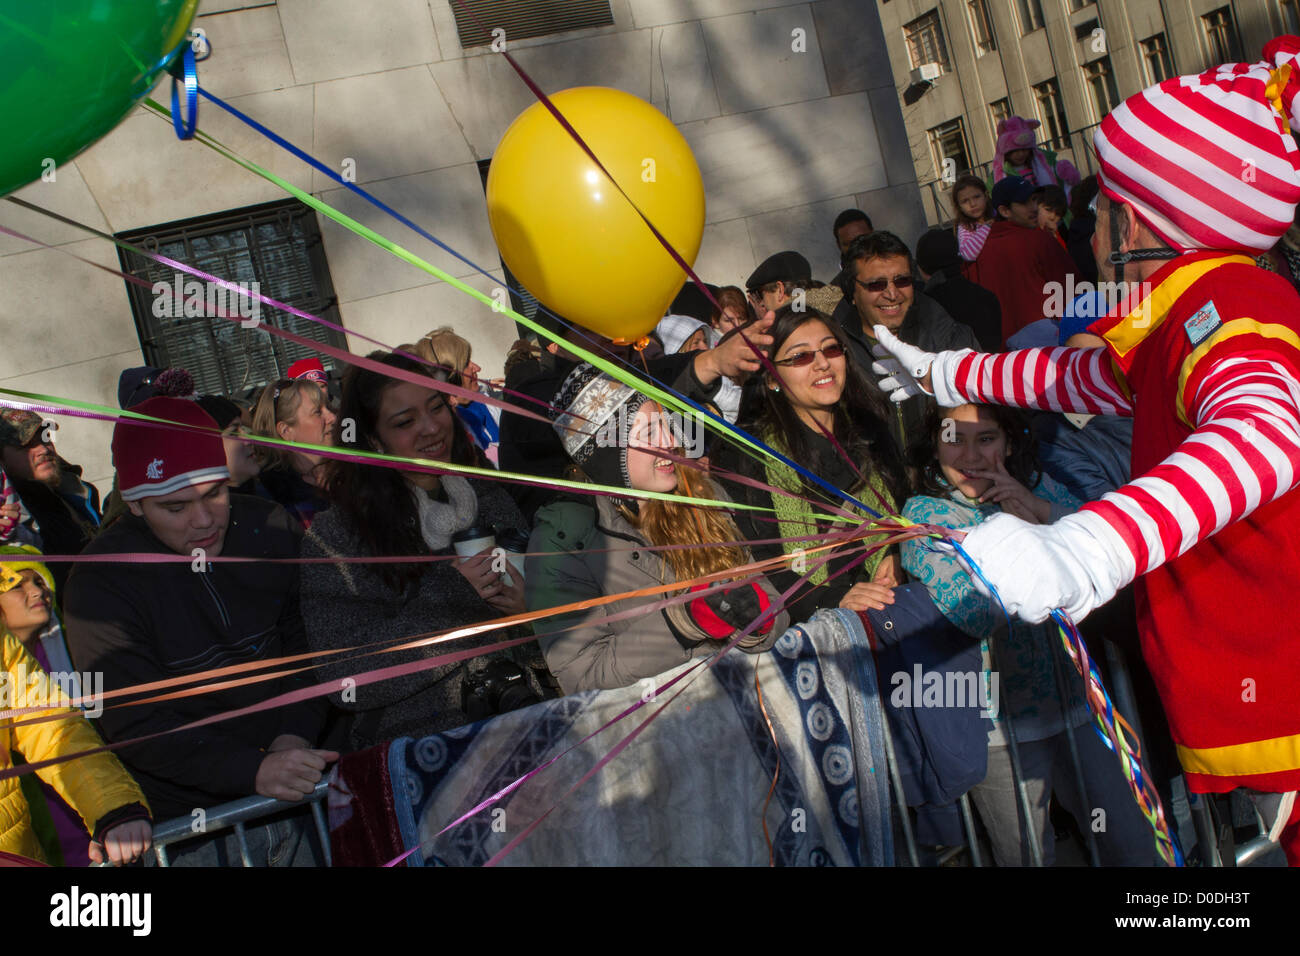 Clown hands out balloons along Central Park West at Macy's Thanksgiving Day Parade in New York City, on Thursday, Nov. 22, 2012. Stock Photo